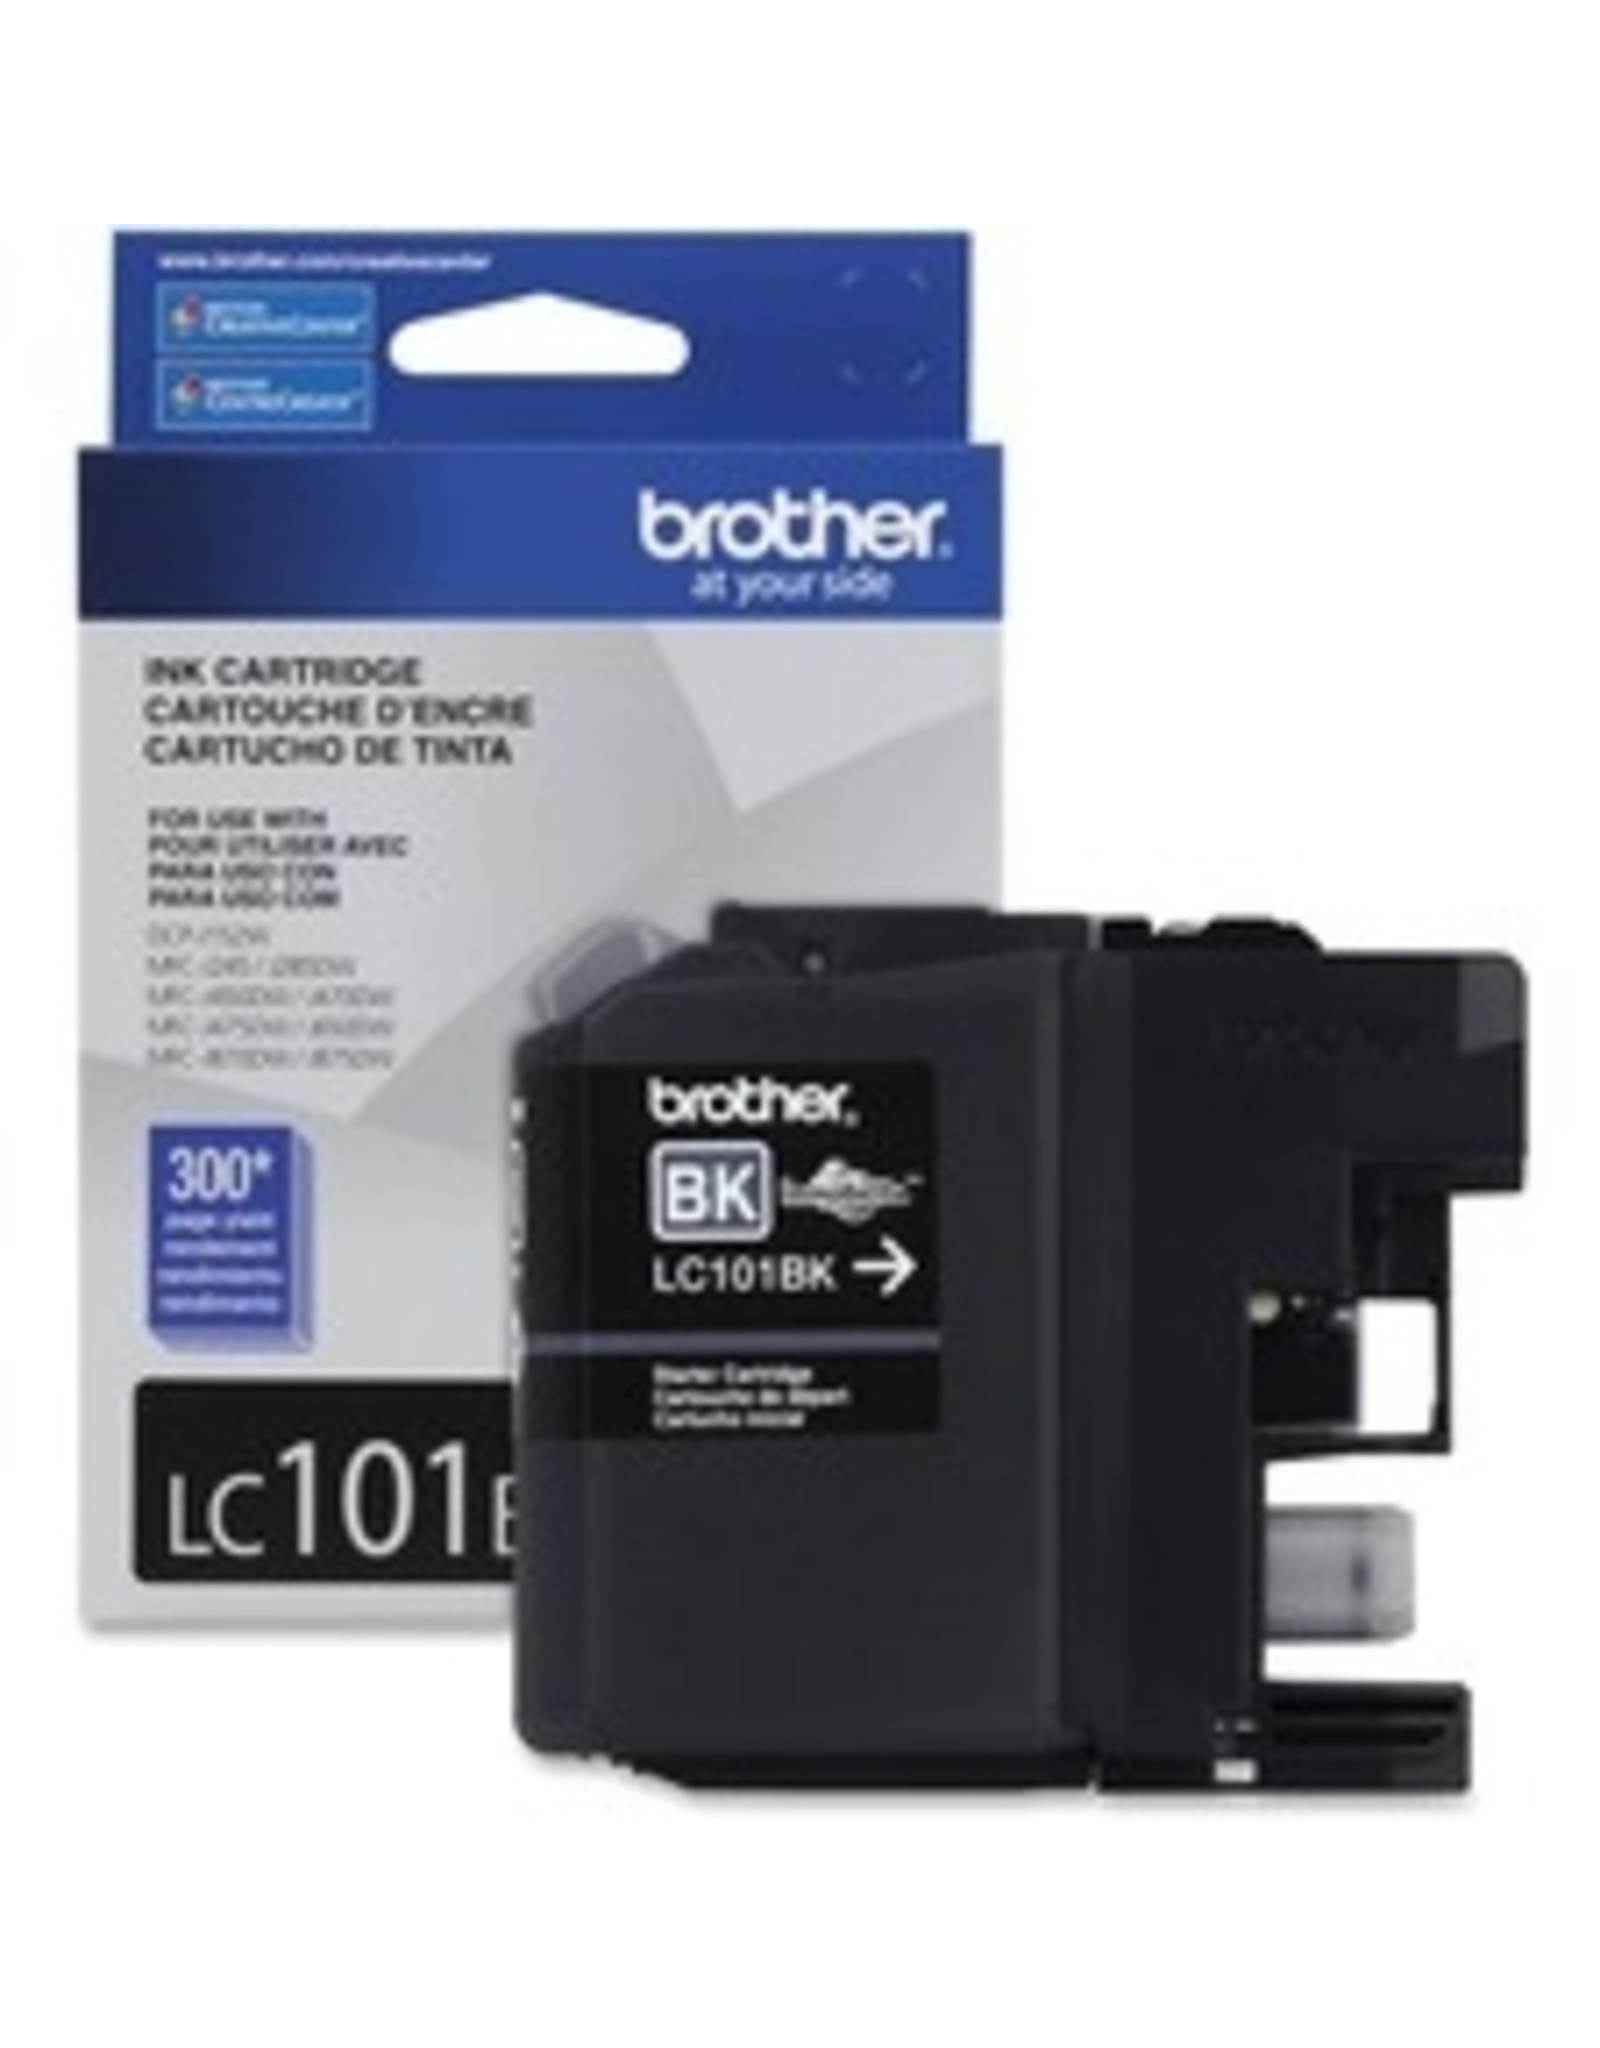 Brother Brother LC101BK Black Ink Cartridge